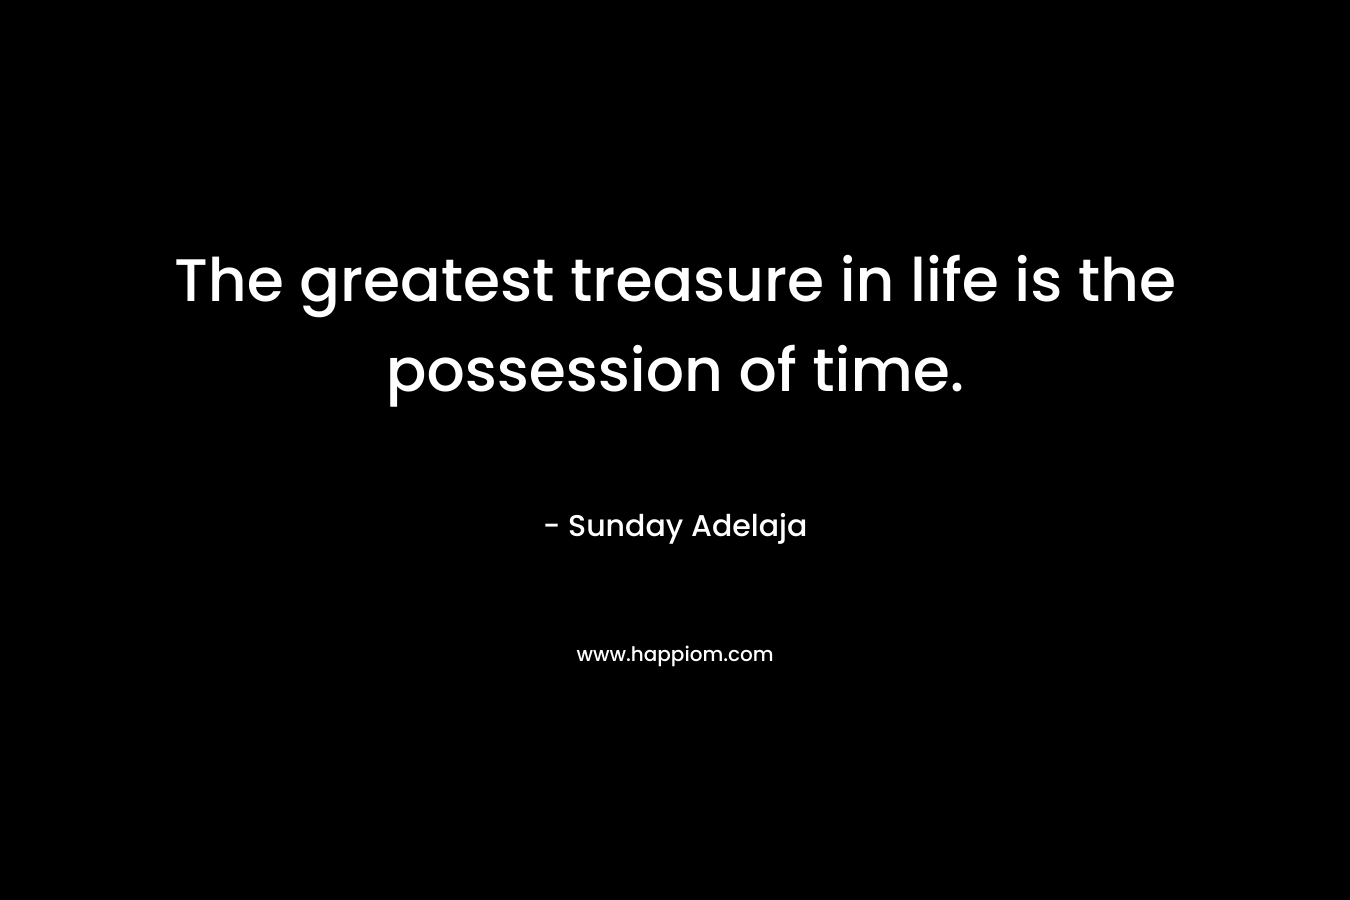 The greatest treasure in life is the possession of time.